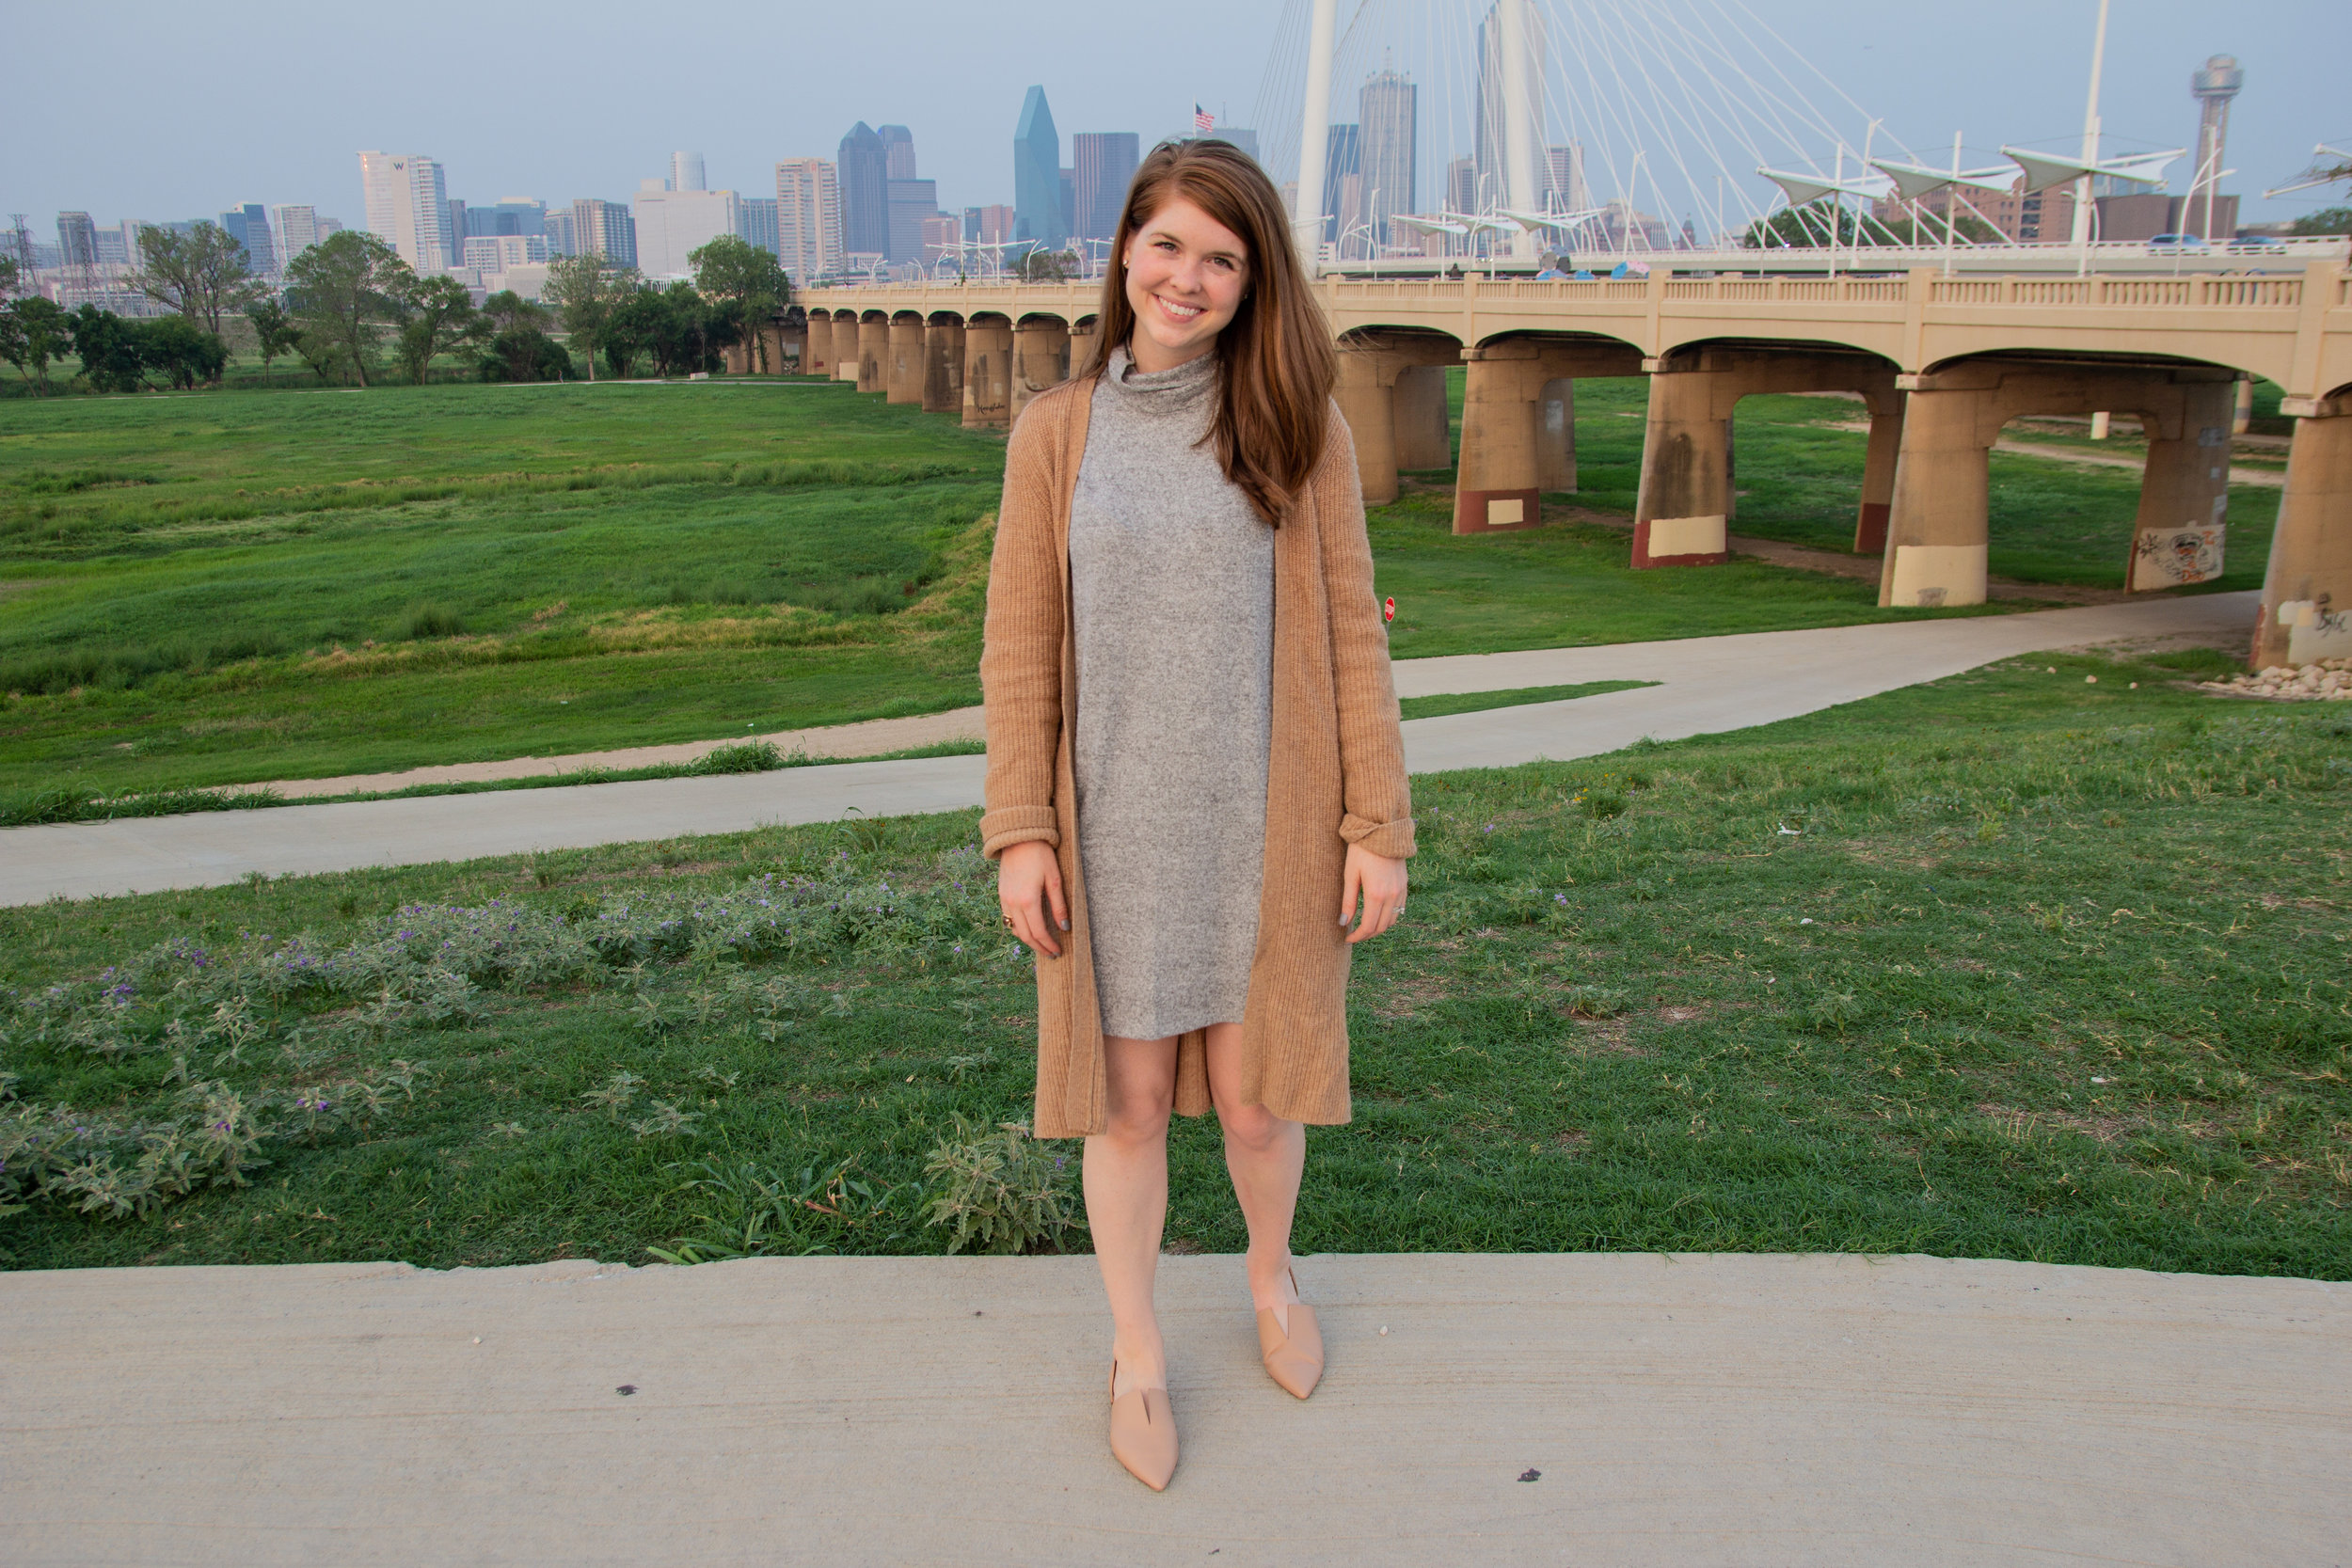 the art of versatility, easy chic, lments of style, ellespann, fall style, fall outfit inspo, aerie plush turtleneck dress, nude vince darlington flats, oatmeal cardigan, dallas blogger